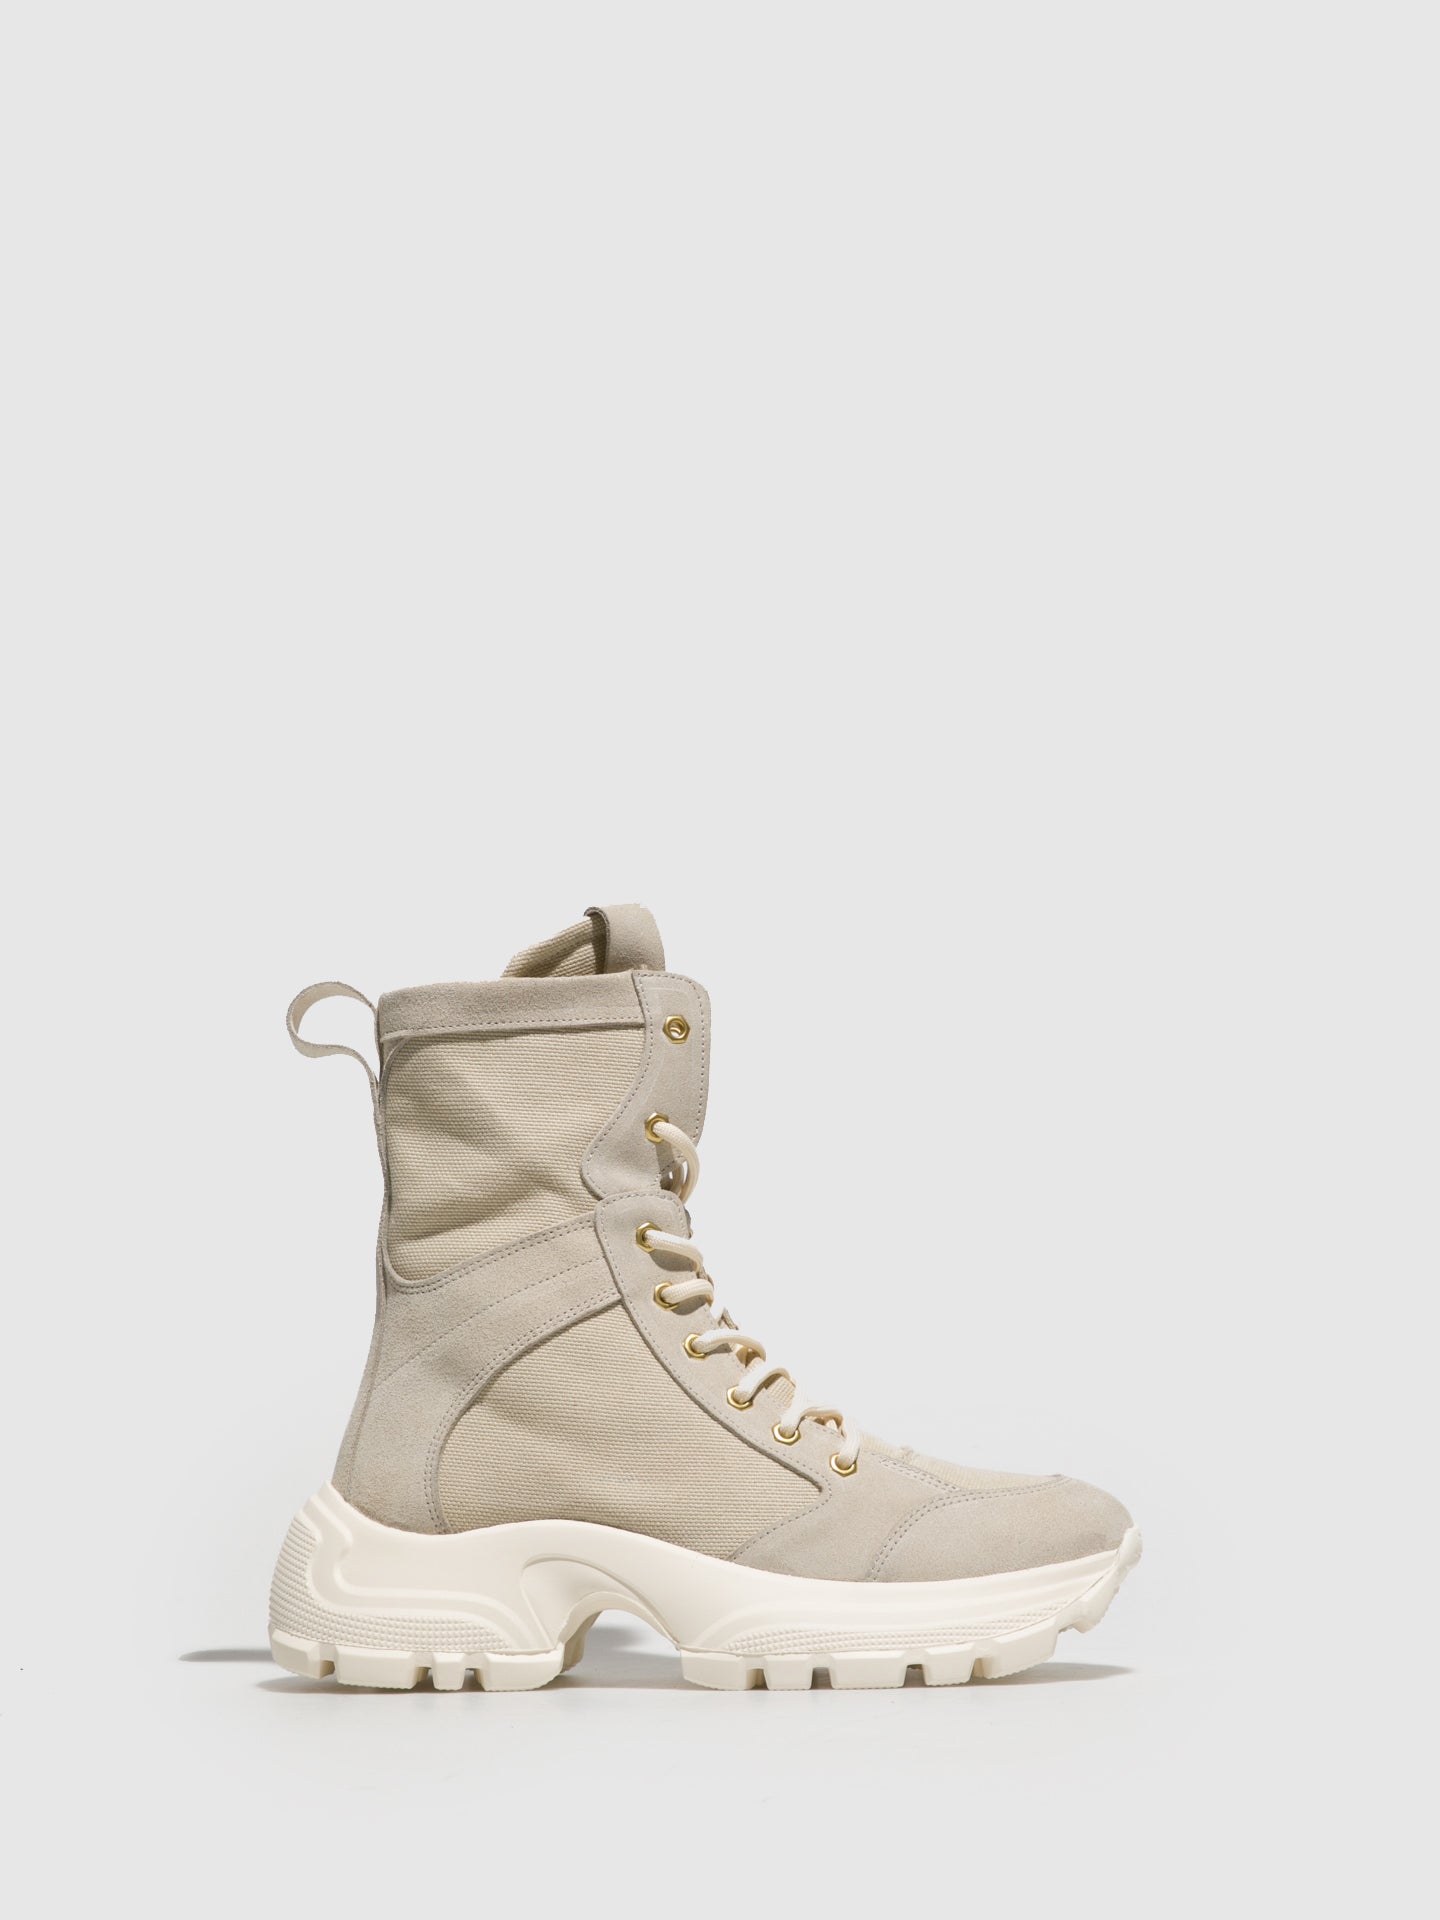 Fungi Beige Lace-up Boots